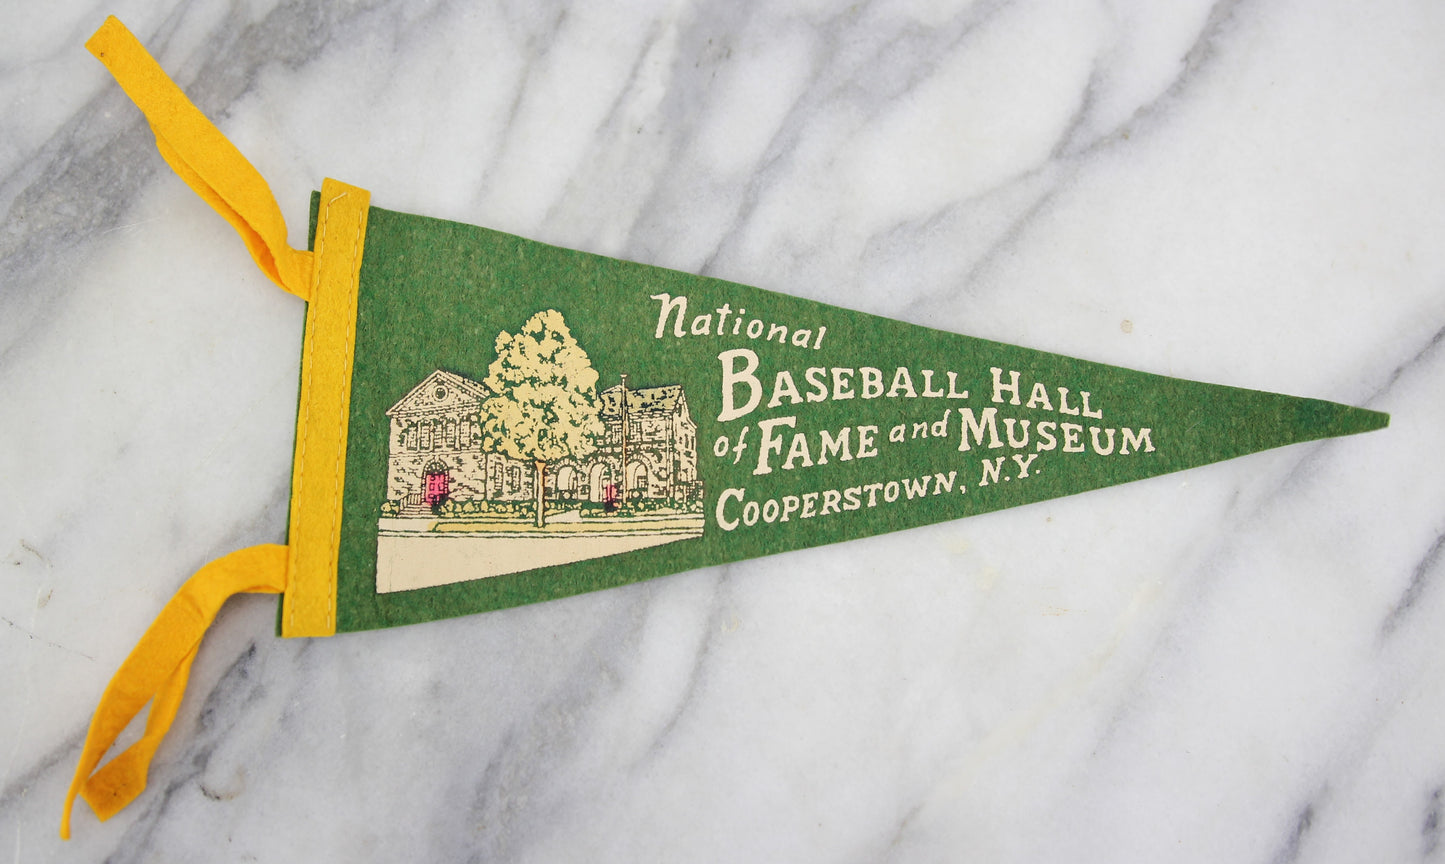 National Baseball Hall of Fame, Cooperstown, N.Y. Souvenir Pennant - 12"